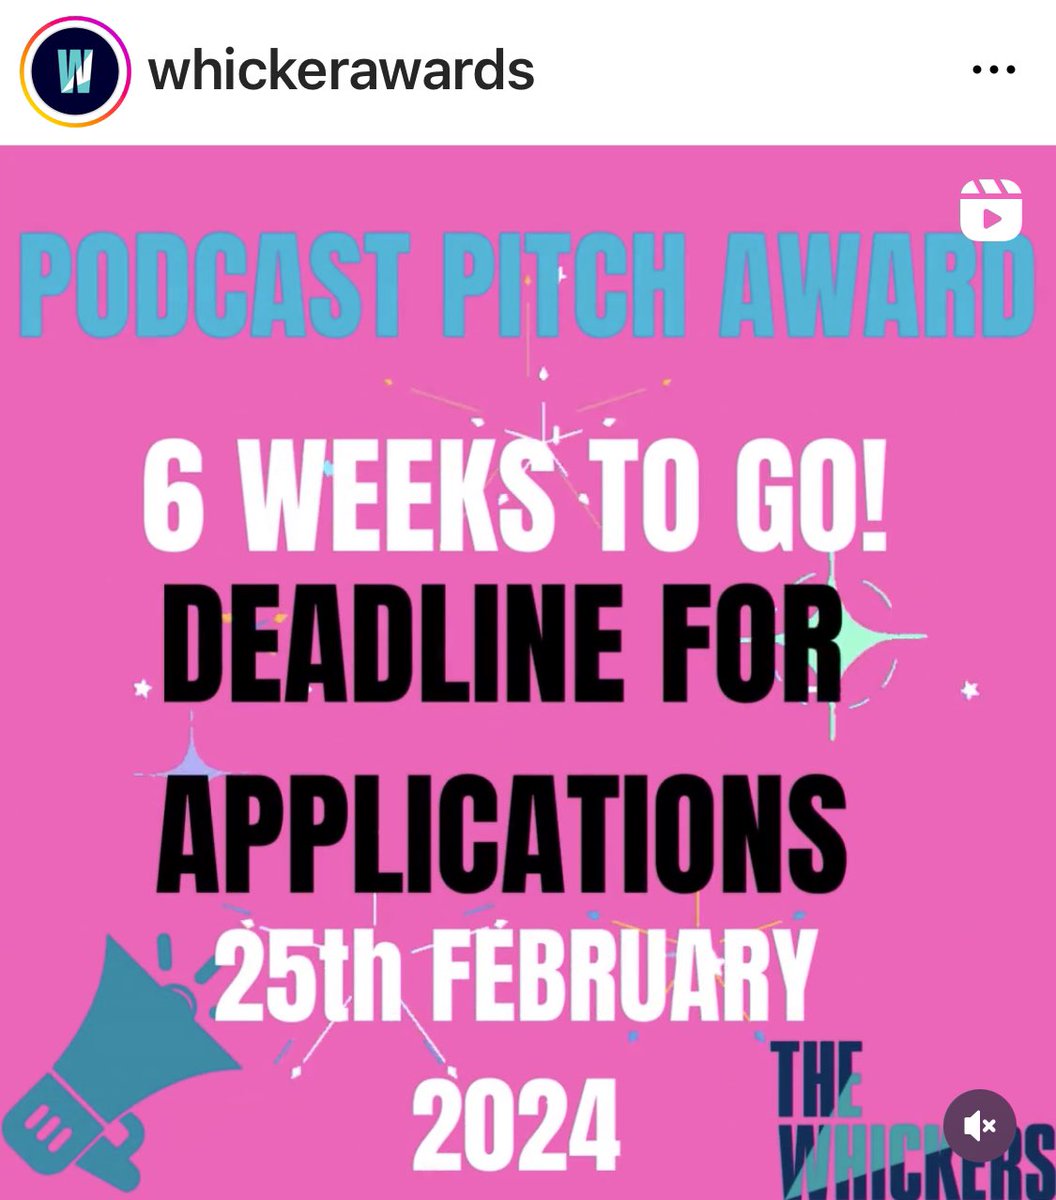 For podcast’s creators check out the @whickerawards pitch award.